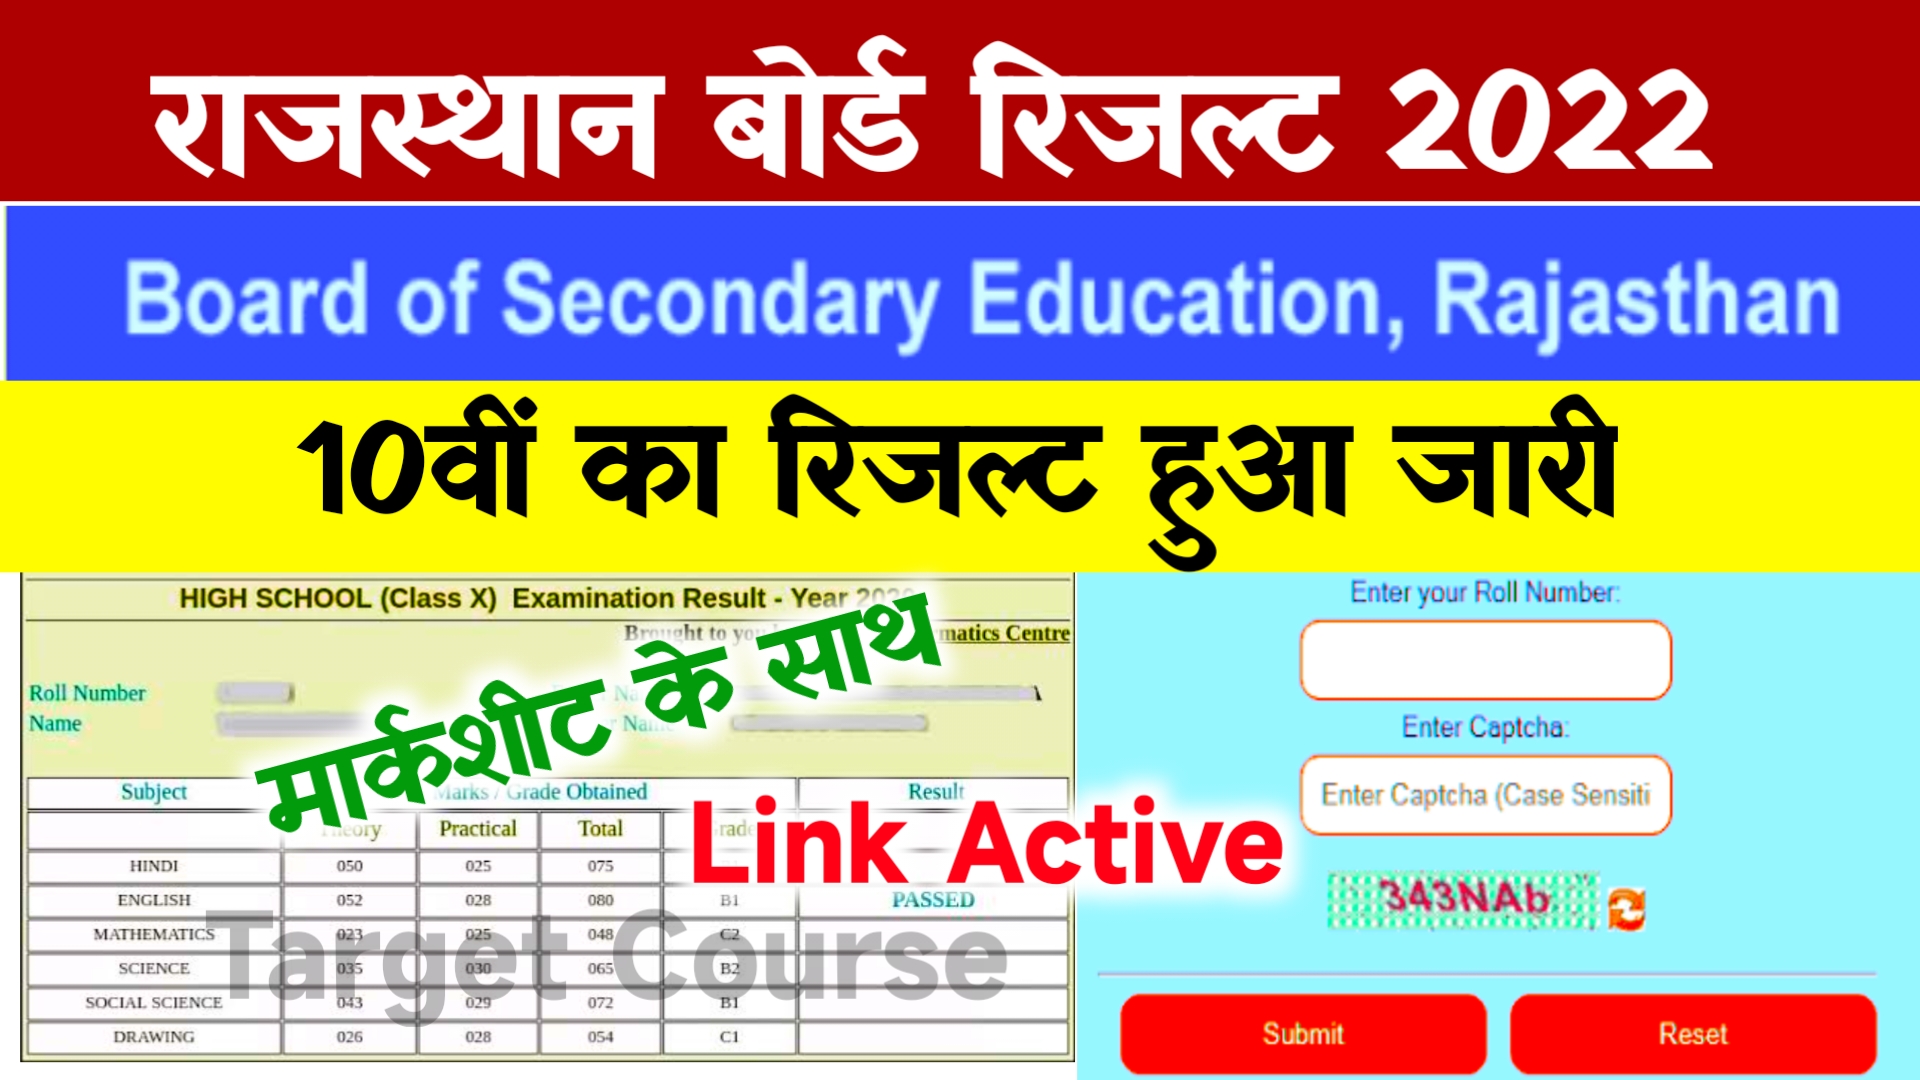 Rajasthan Board 10th Result 2022 Live : Check Now @rajresults.nic.in